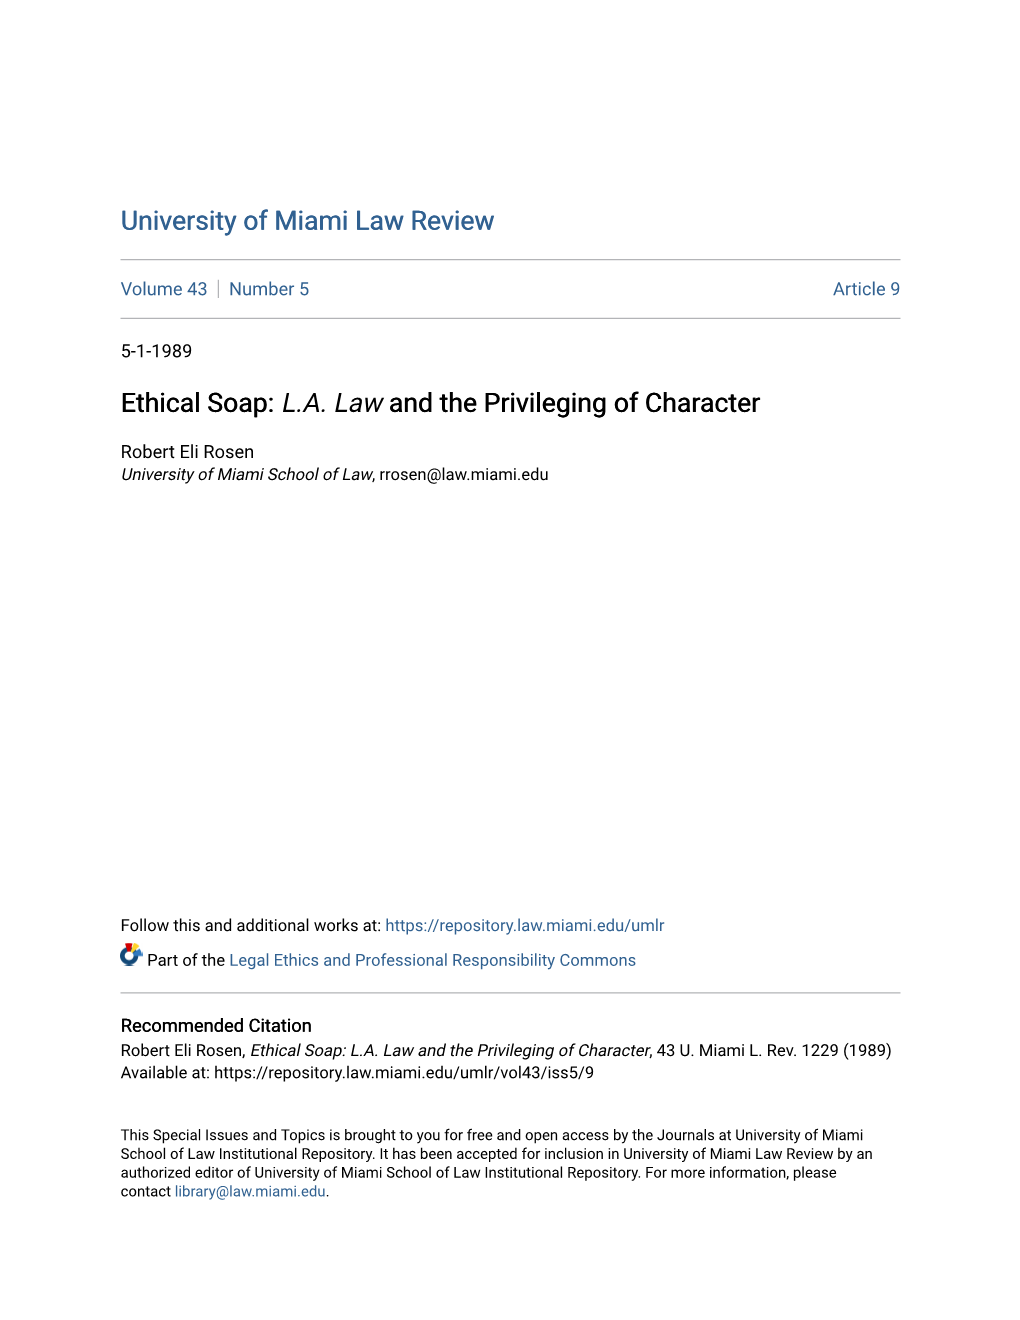 Ethical Soap: L.A. Law and the Privileging of Character